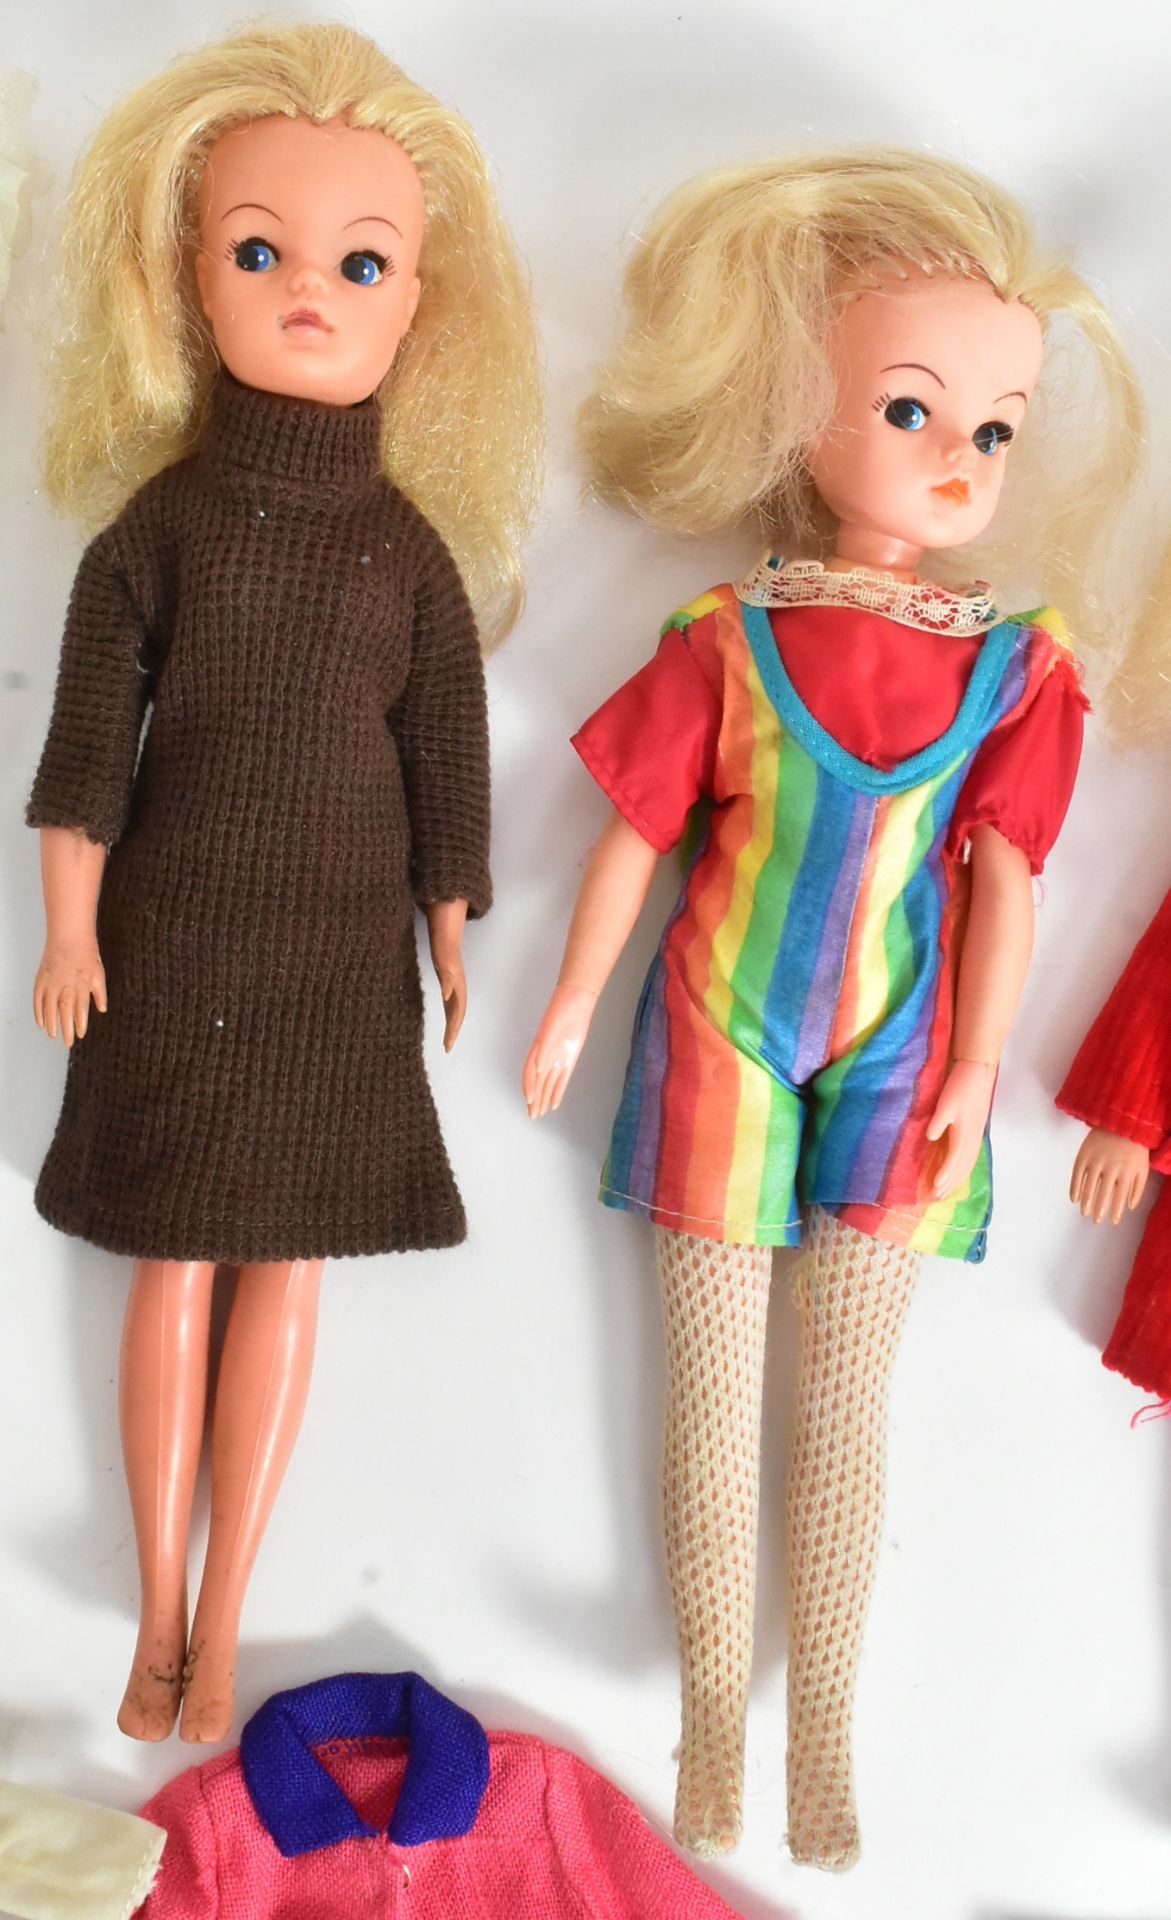 SINDY - PEDIGREE - COLLECTION OF VINTAGE DOLLS / CLOTHING - Image 2 of 7